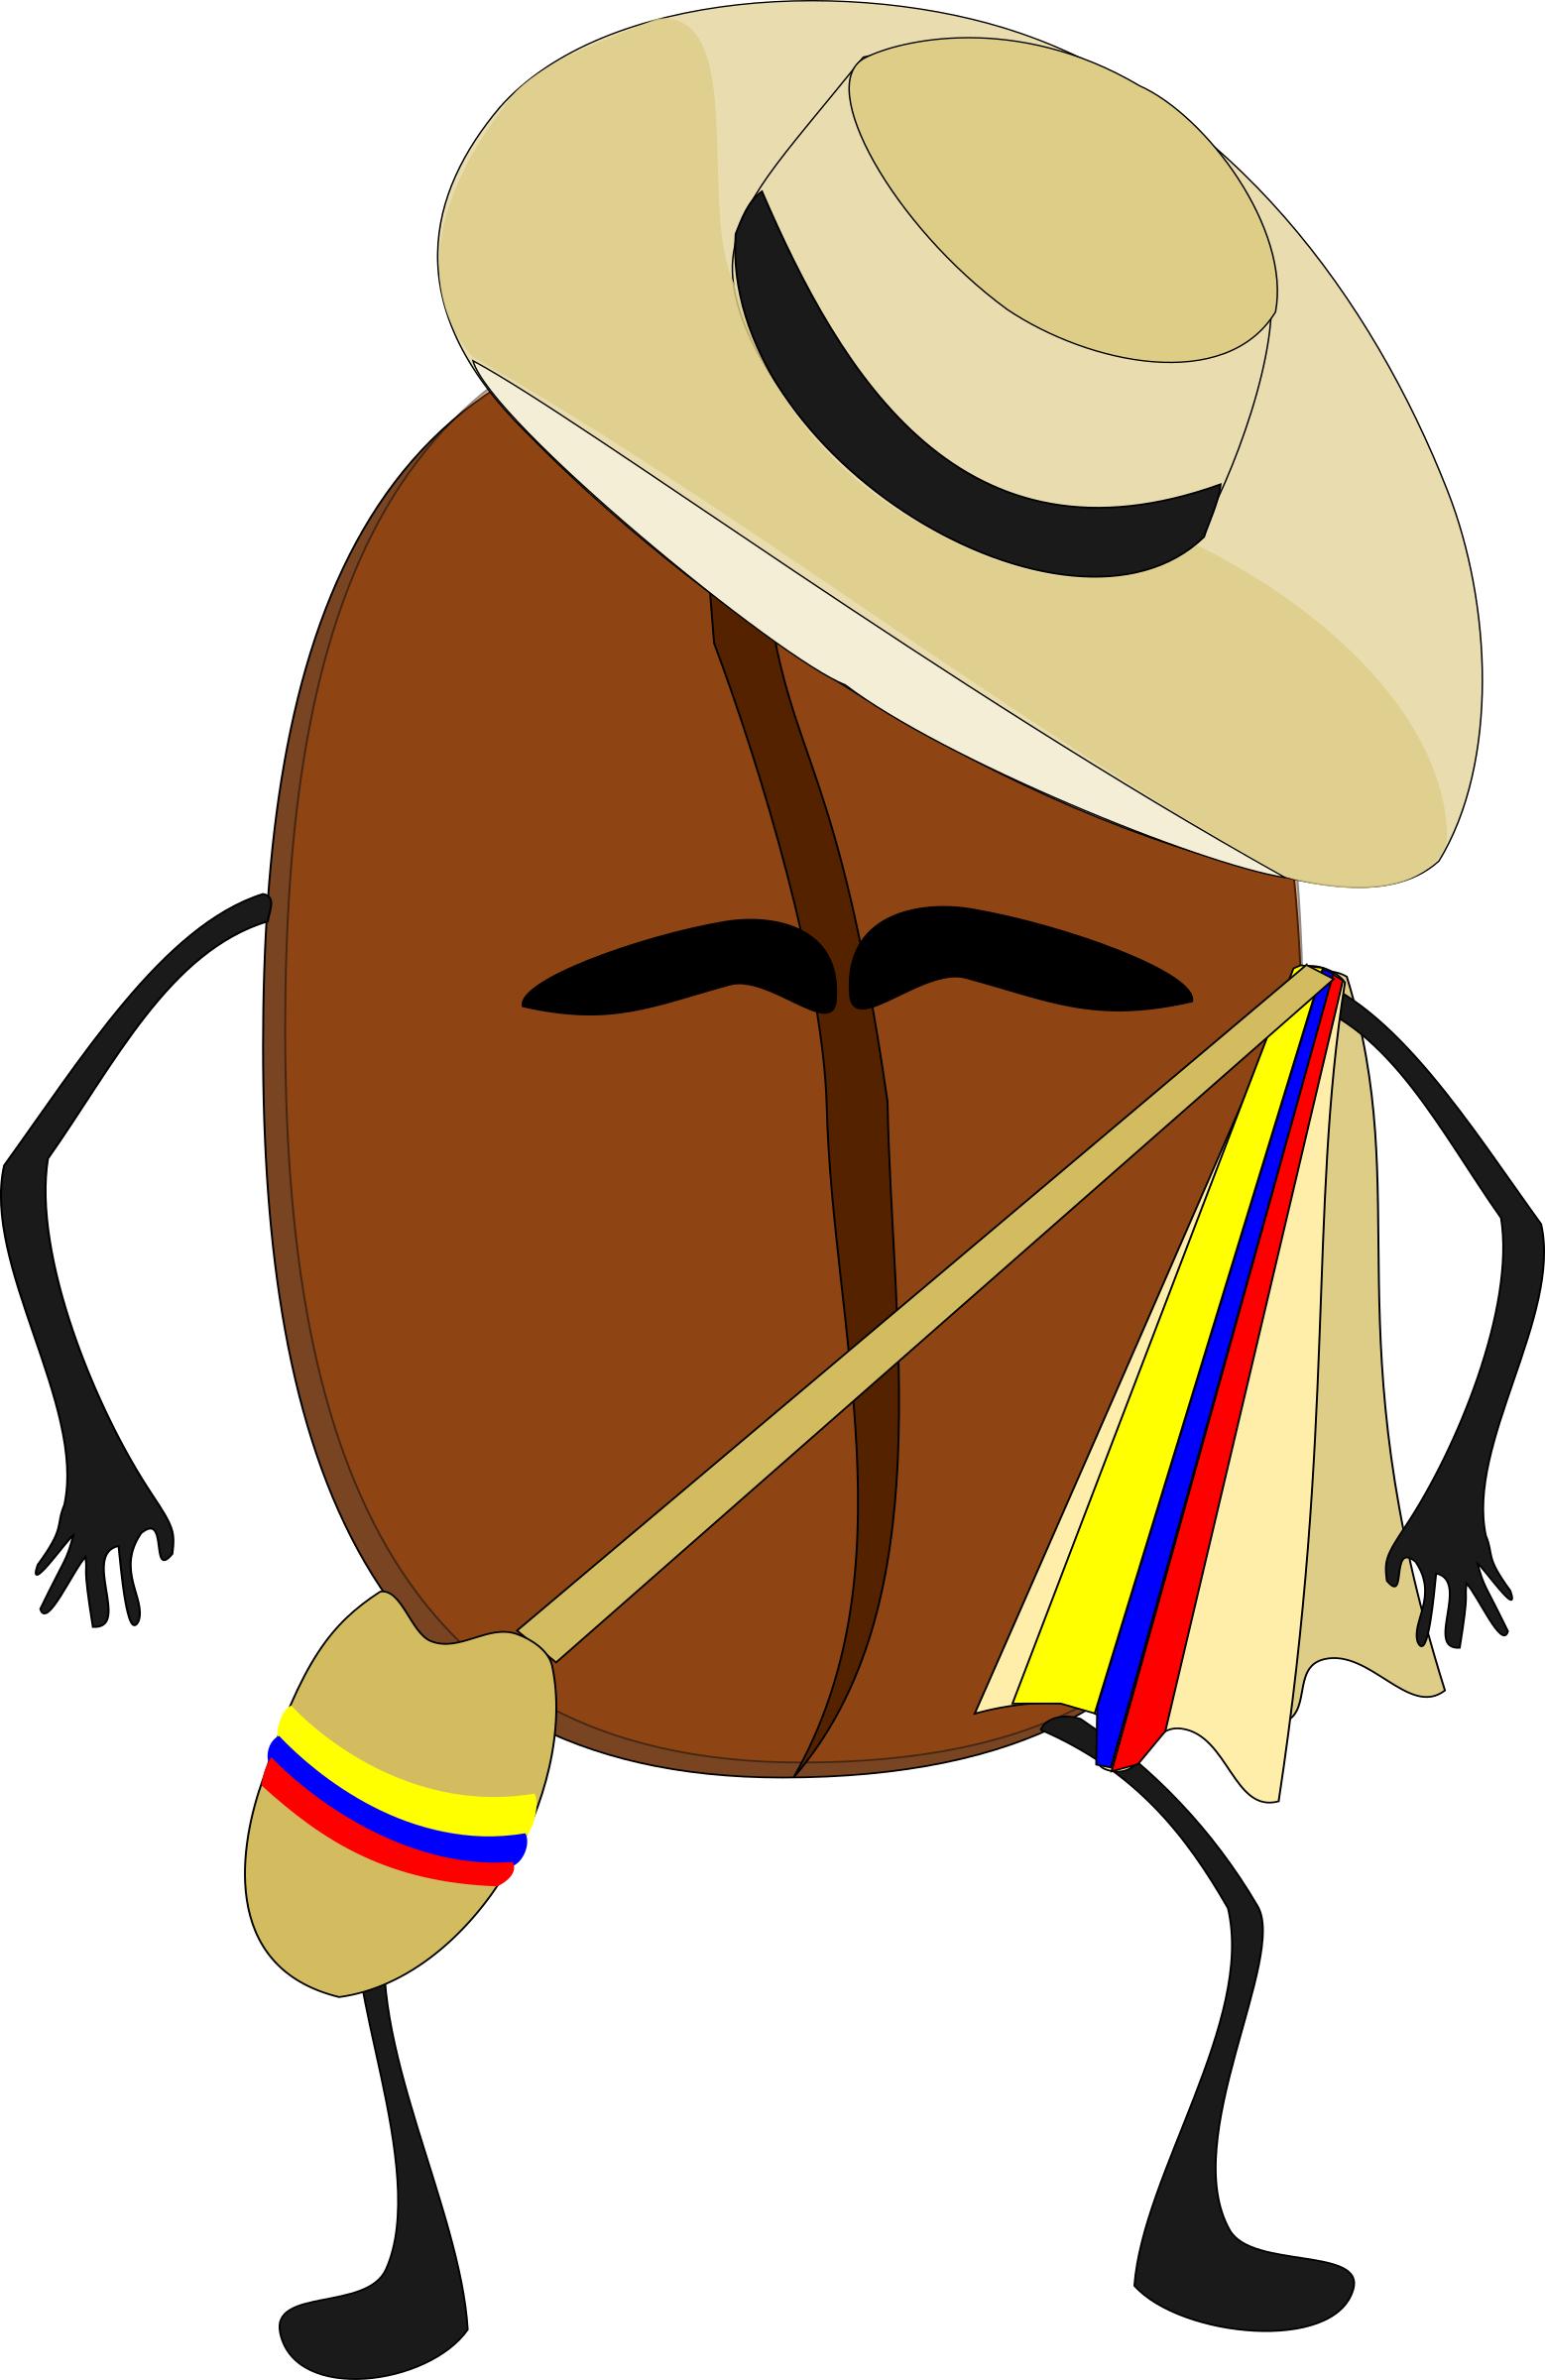 grano de cafe colombiano png